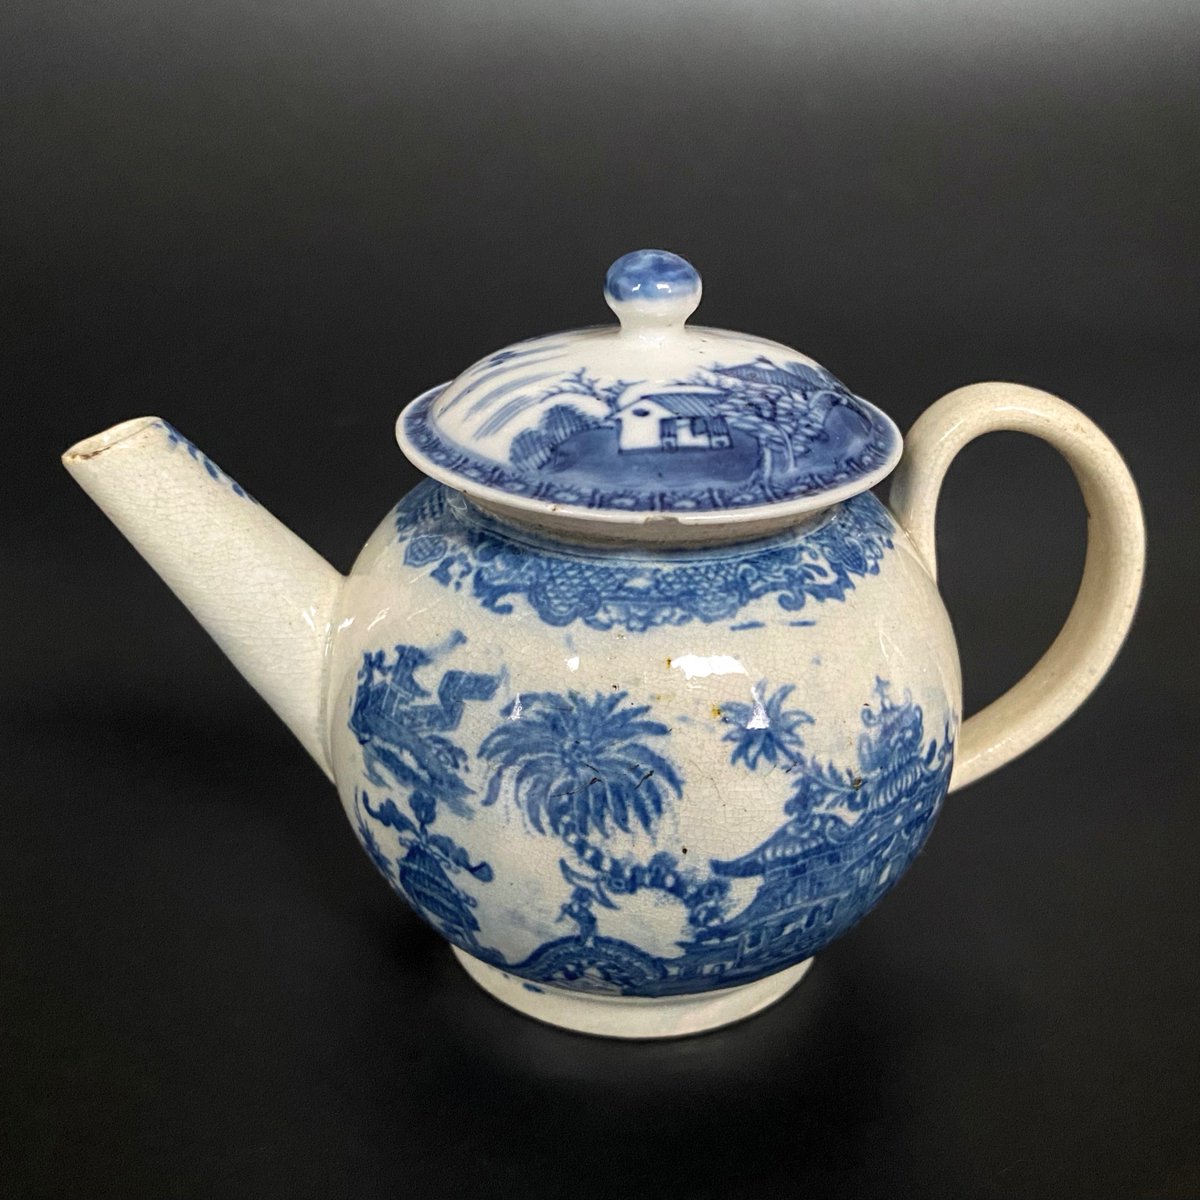 Just listed - a tiny English pearlware teapot dating from the late C18th/early C19th. The lid is a mismatch and is Chinese from about the same period. It holds just 200ml and is light as a feather! Sweet little antique 💙
priddeythings.etsy.com/listing/171358…
#pearlware #WillowPattern #teapot